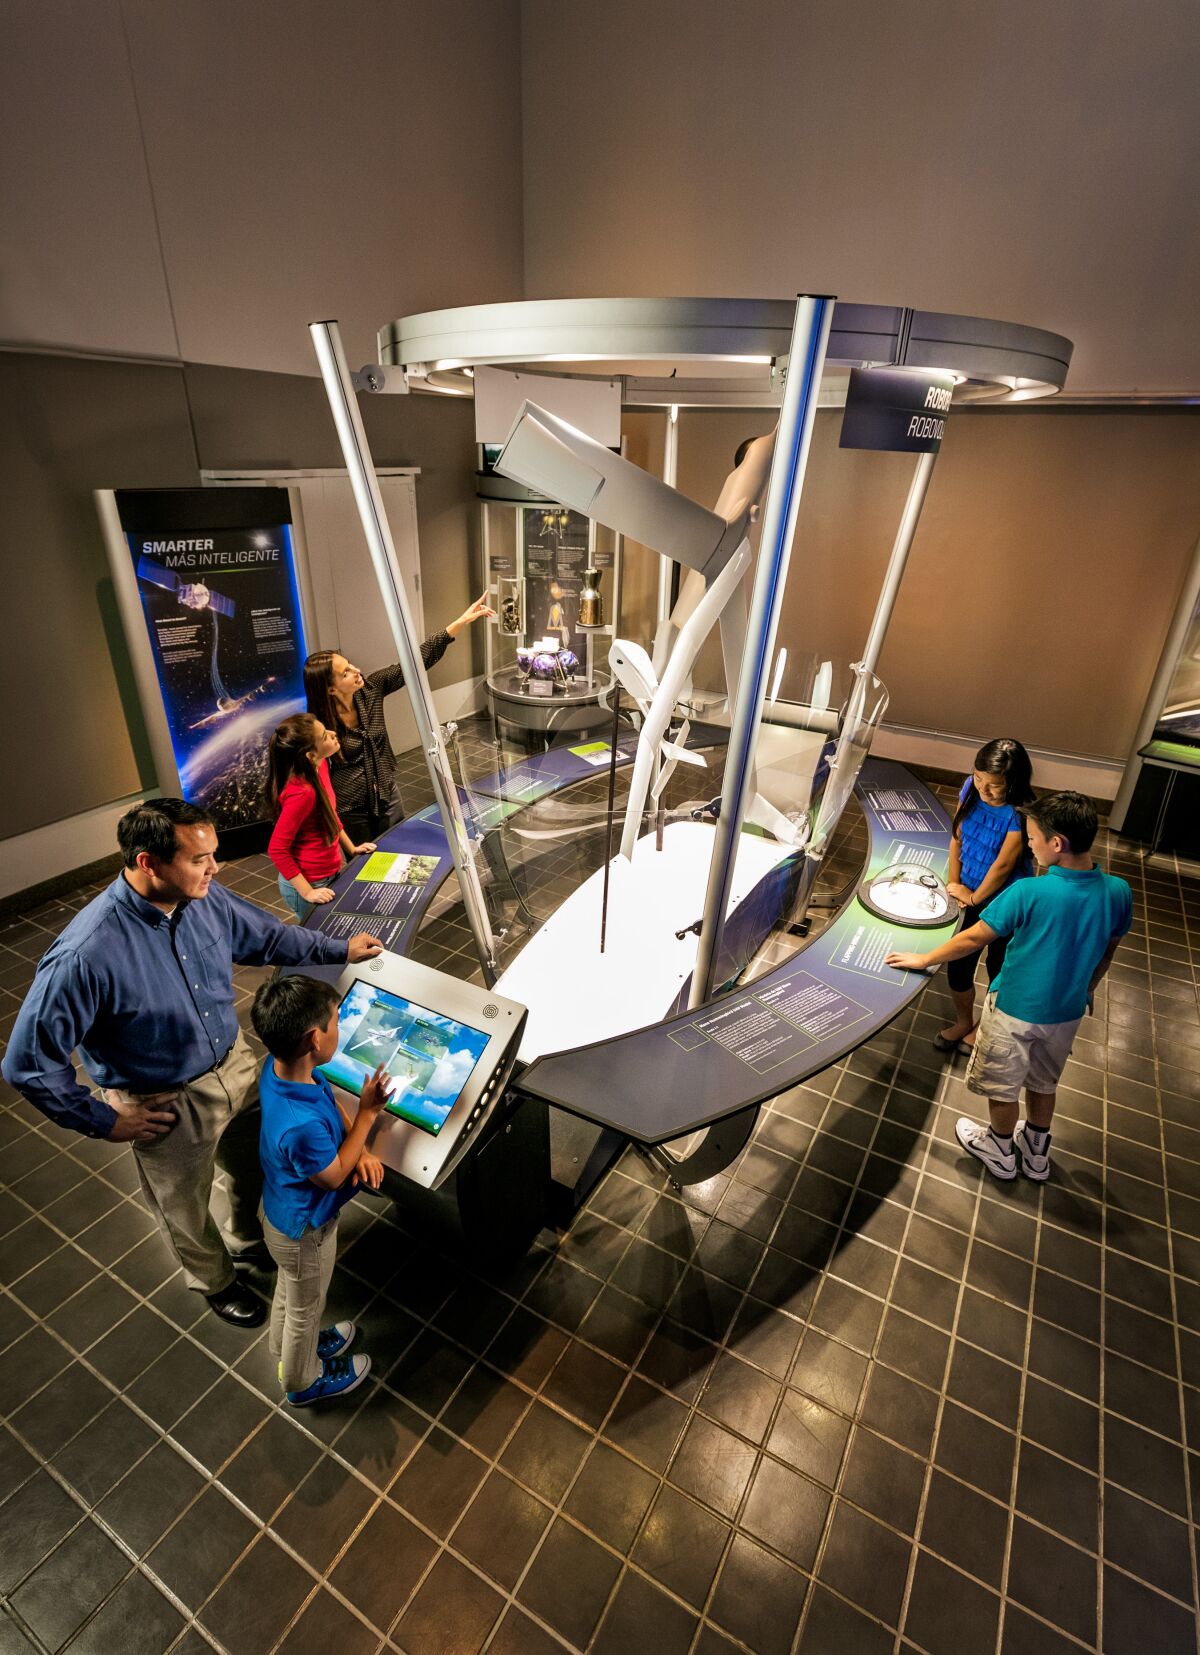 San Diego Air & Space Museum's "Above and Beyond" exhibition allows visitors to design their own robotic flying crafts.